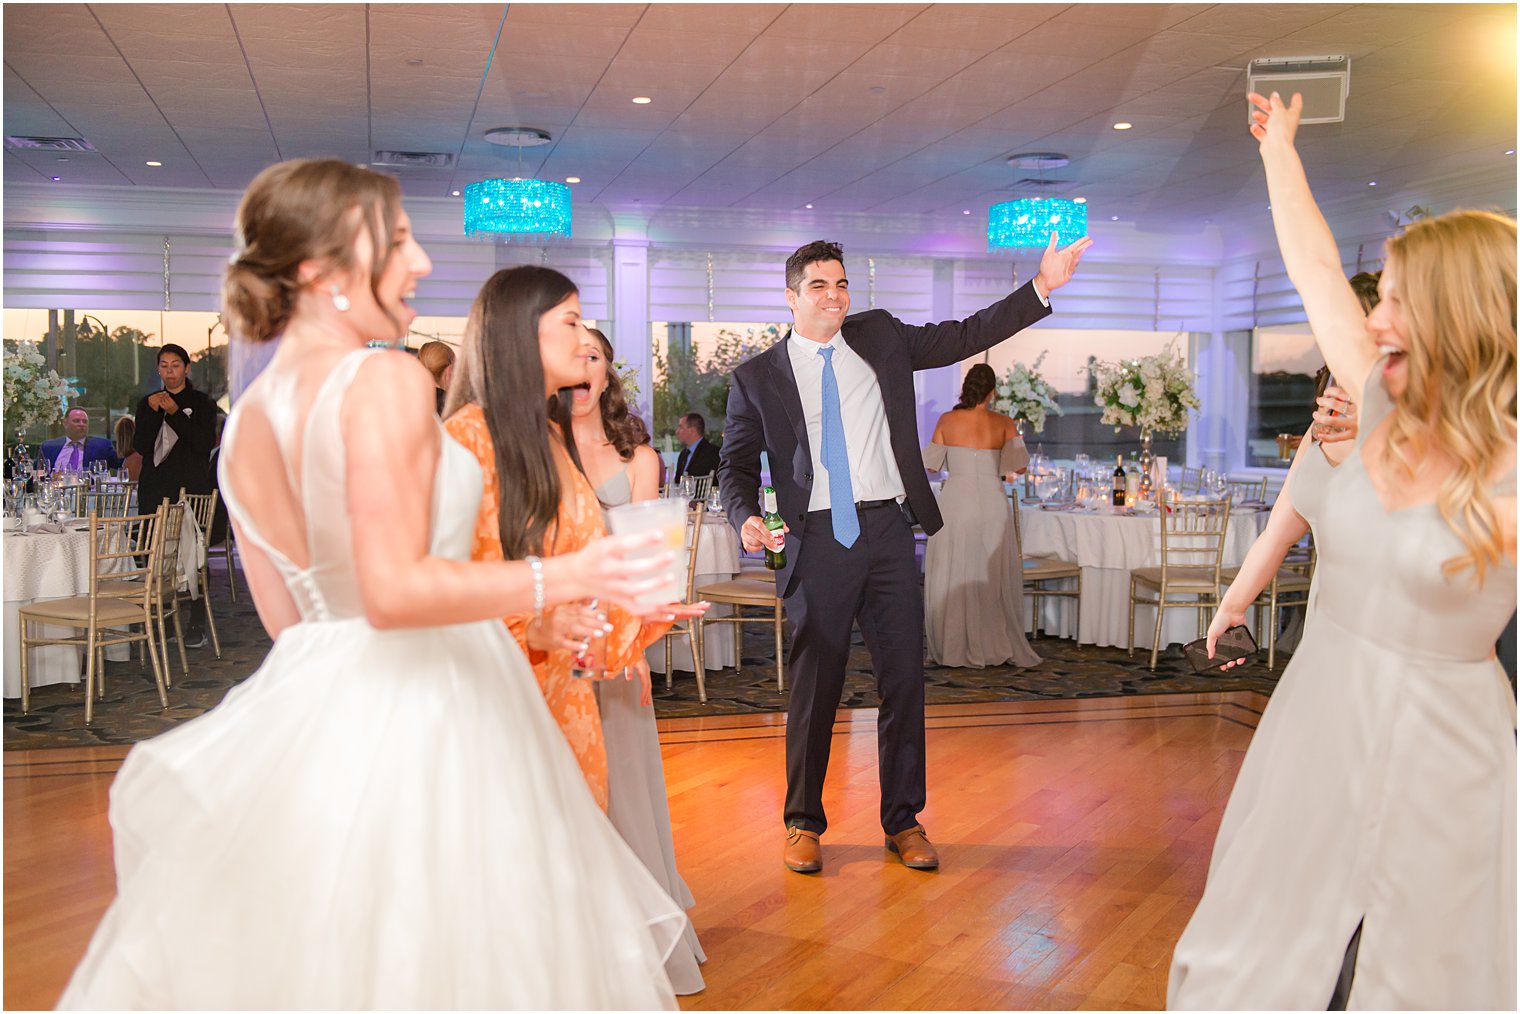 guests dance with bride during wedding reception at Crystal Point Yacht Club